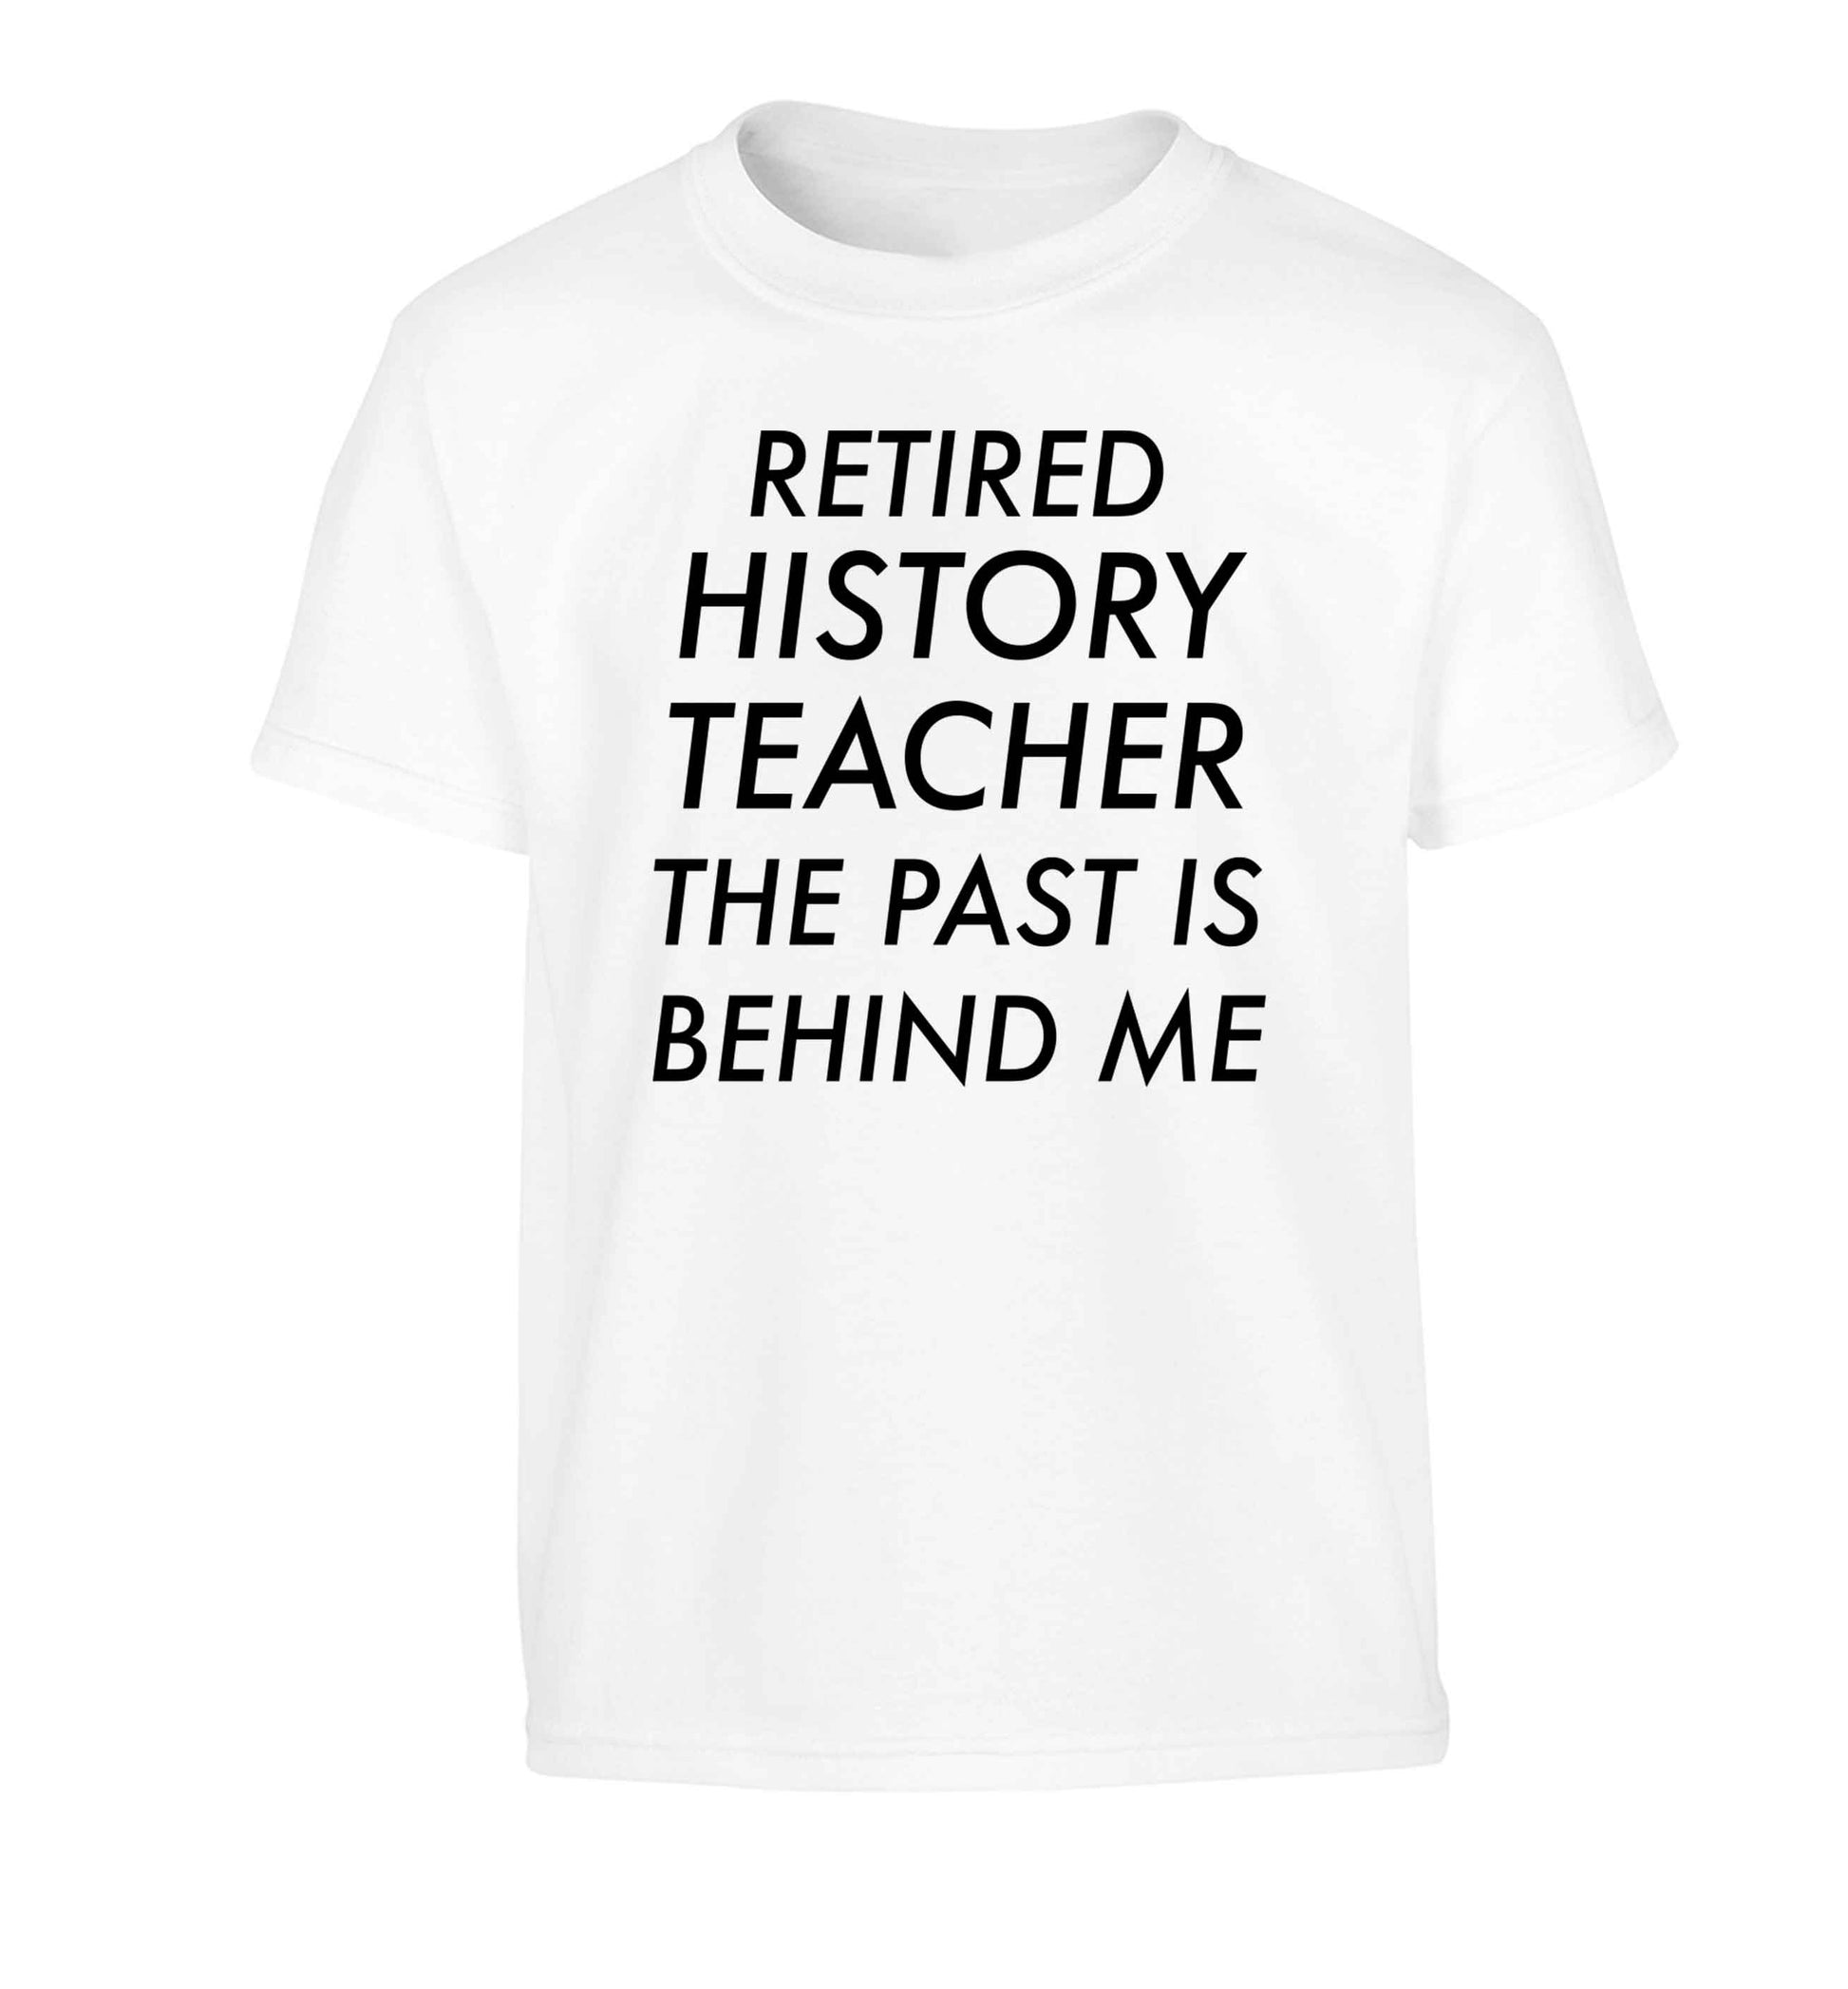 Retired history teacher the past is behind me Children's white Tshirt 12-13 Years